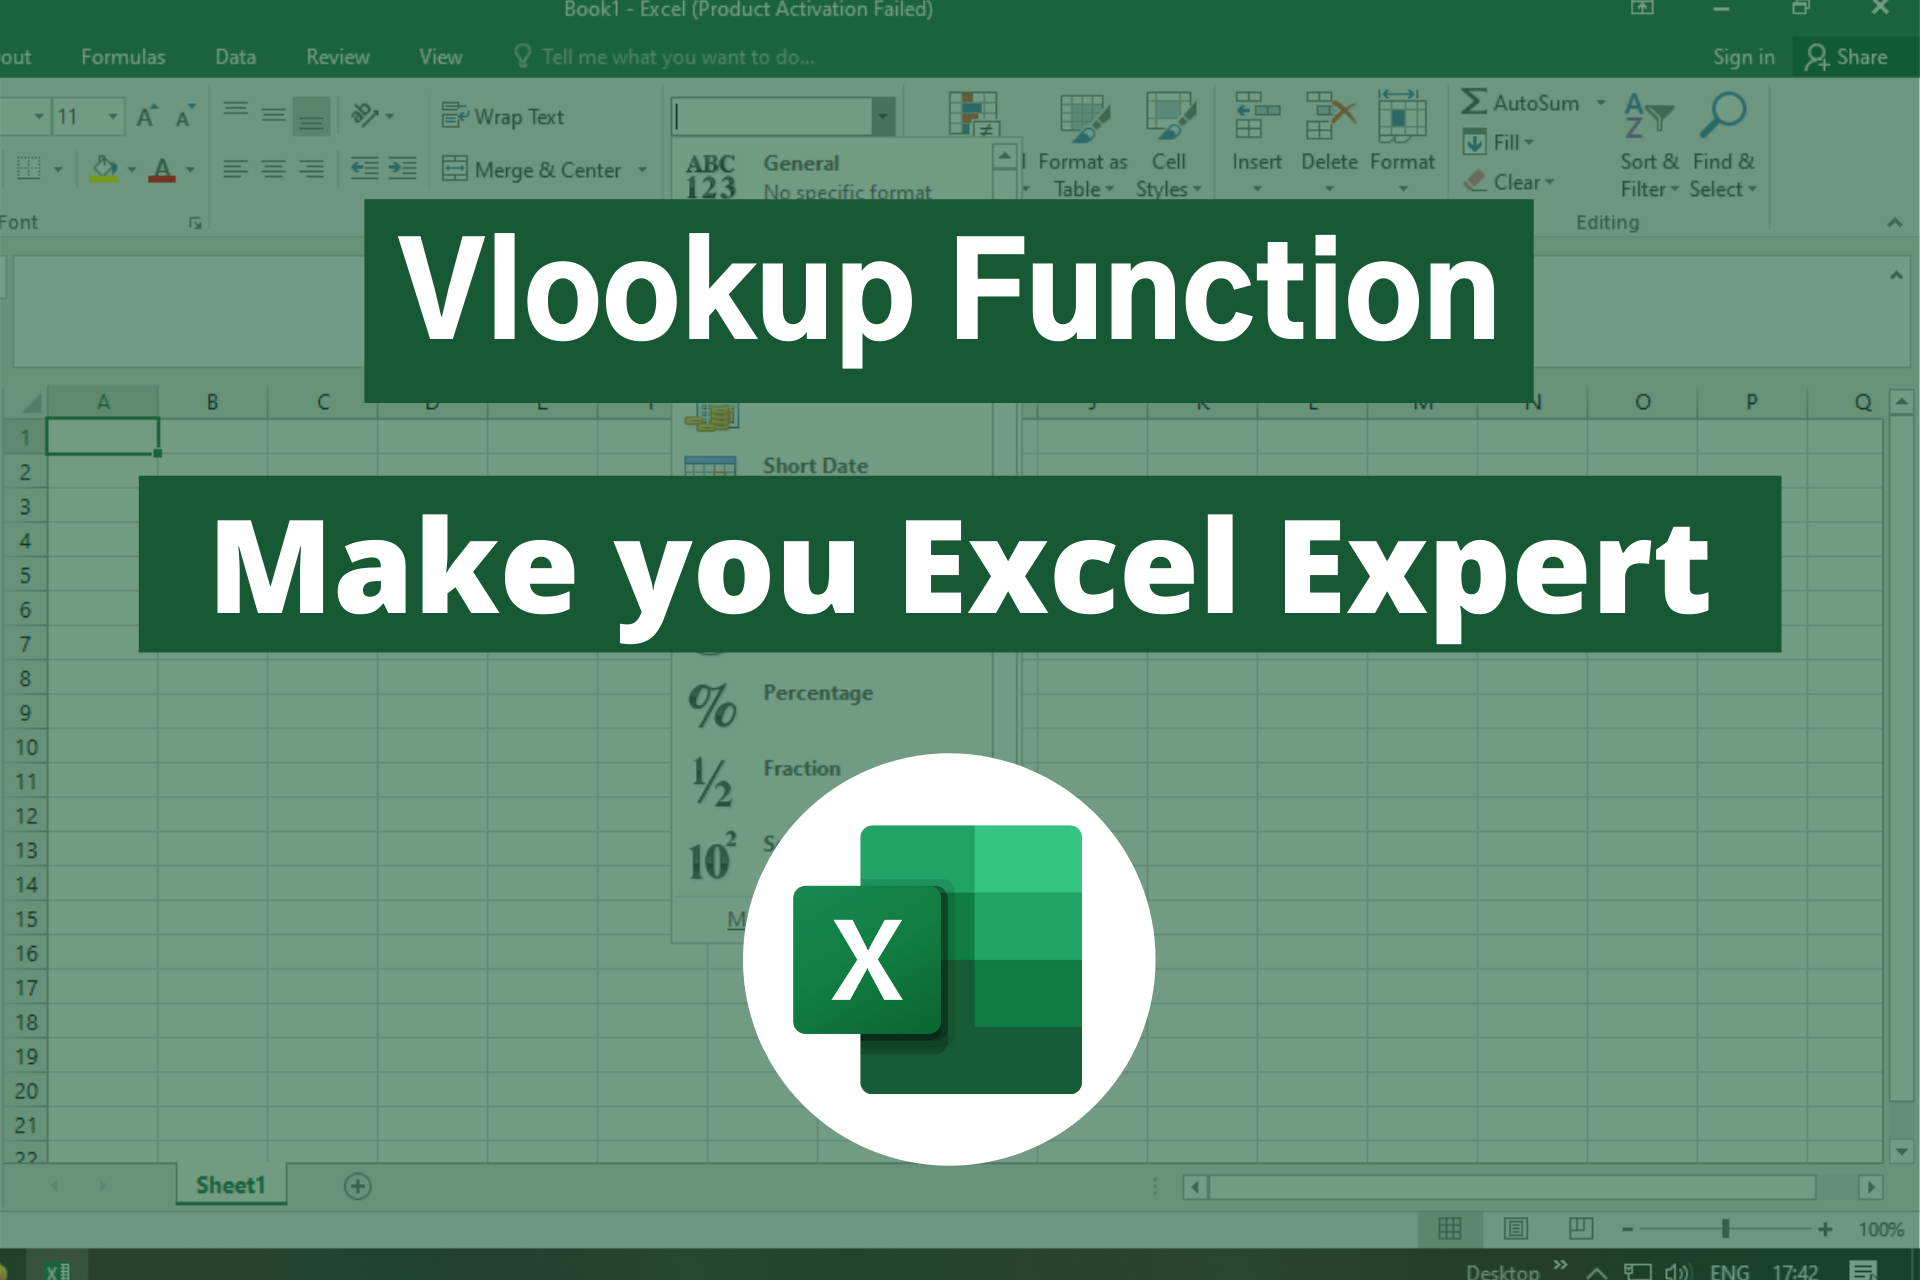 ms excel in hindi